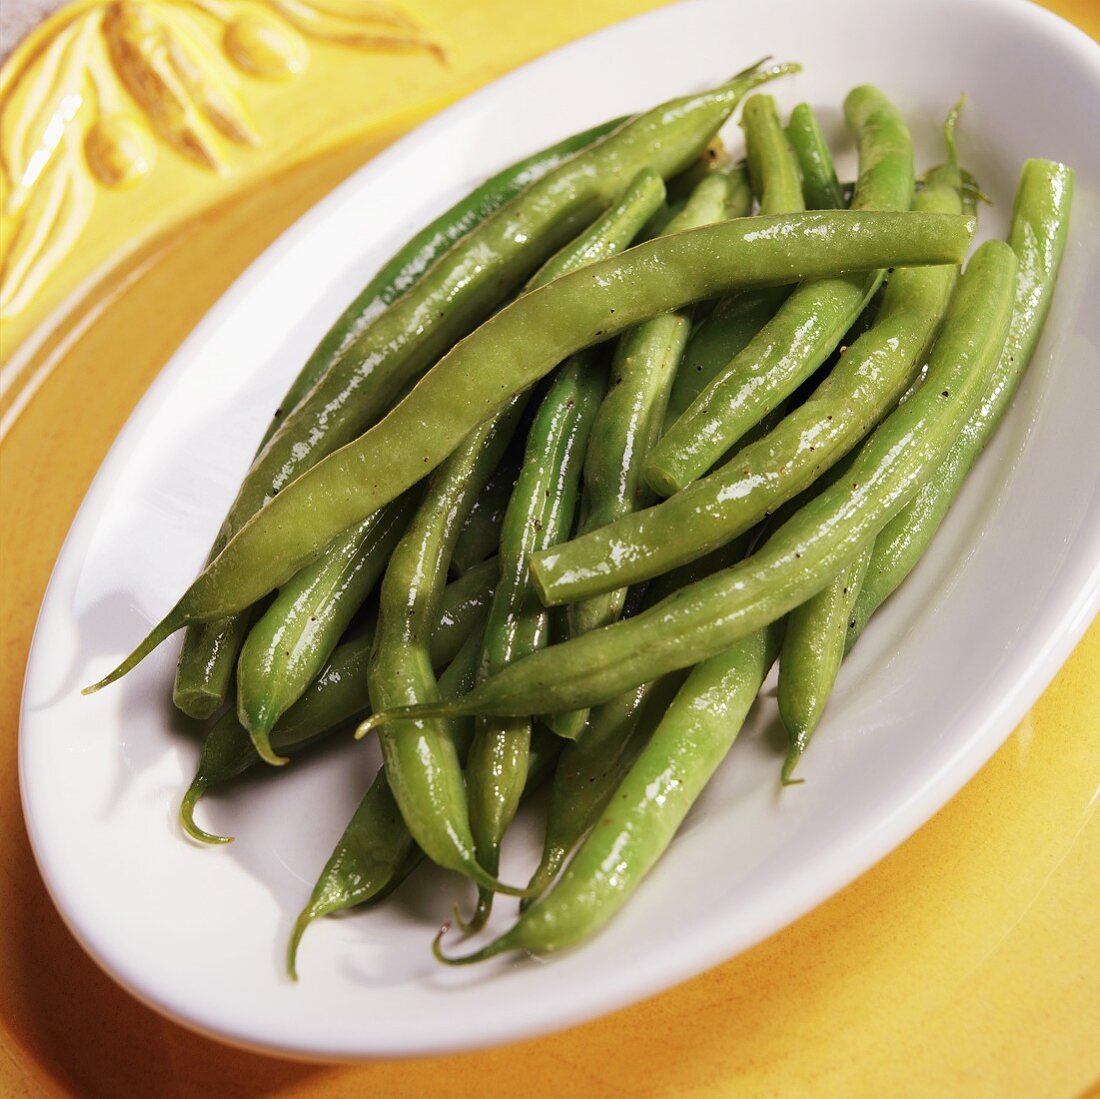 Buttered Green Beans in a Serving Dish